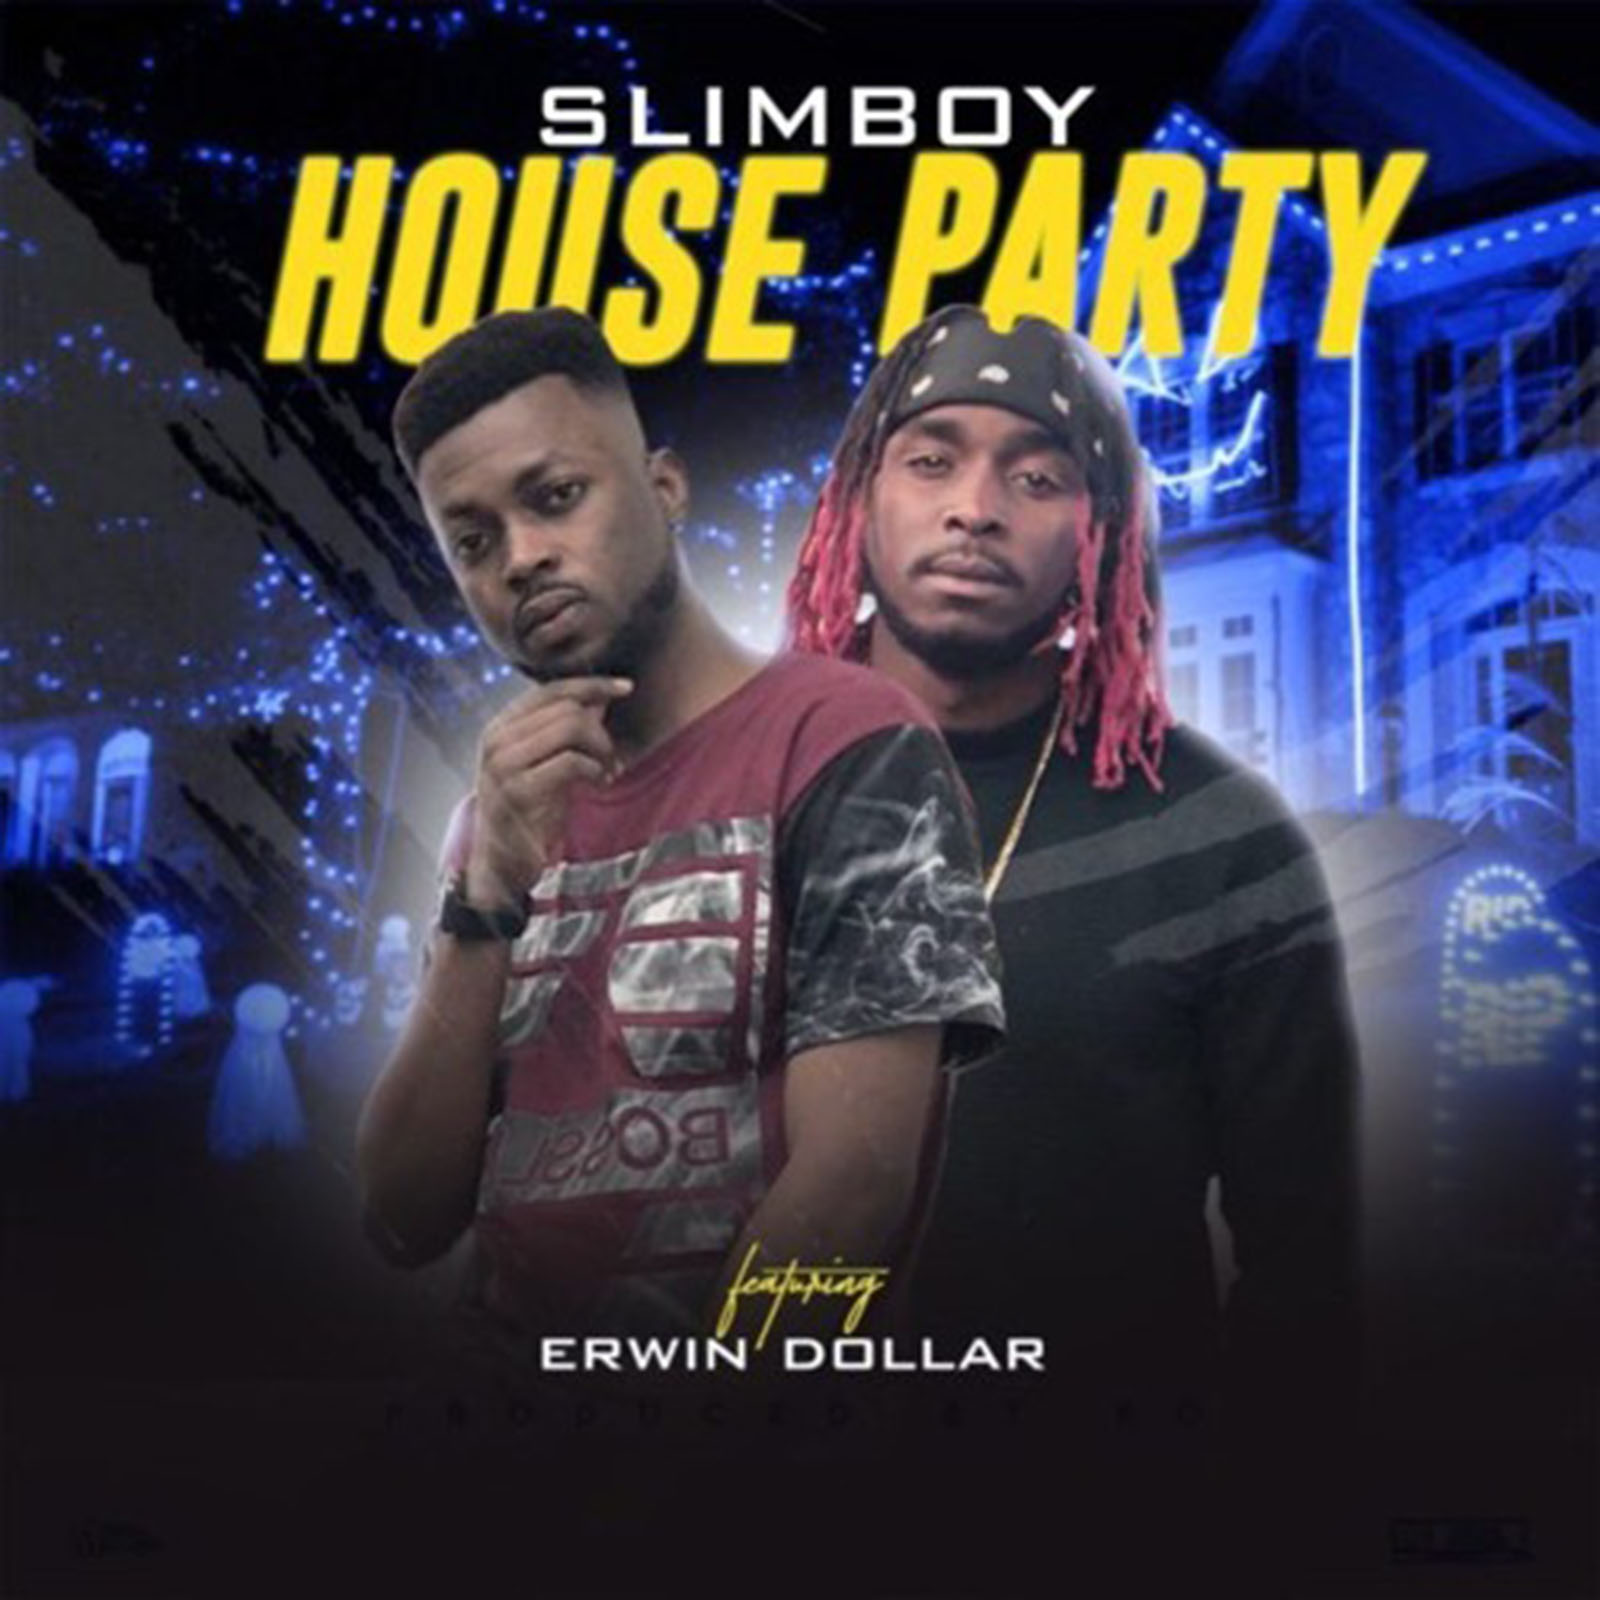 House Party by Slimboy feat. Erwin Dollar